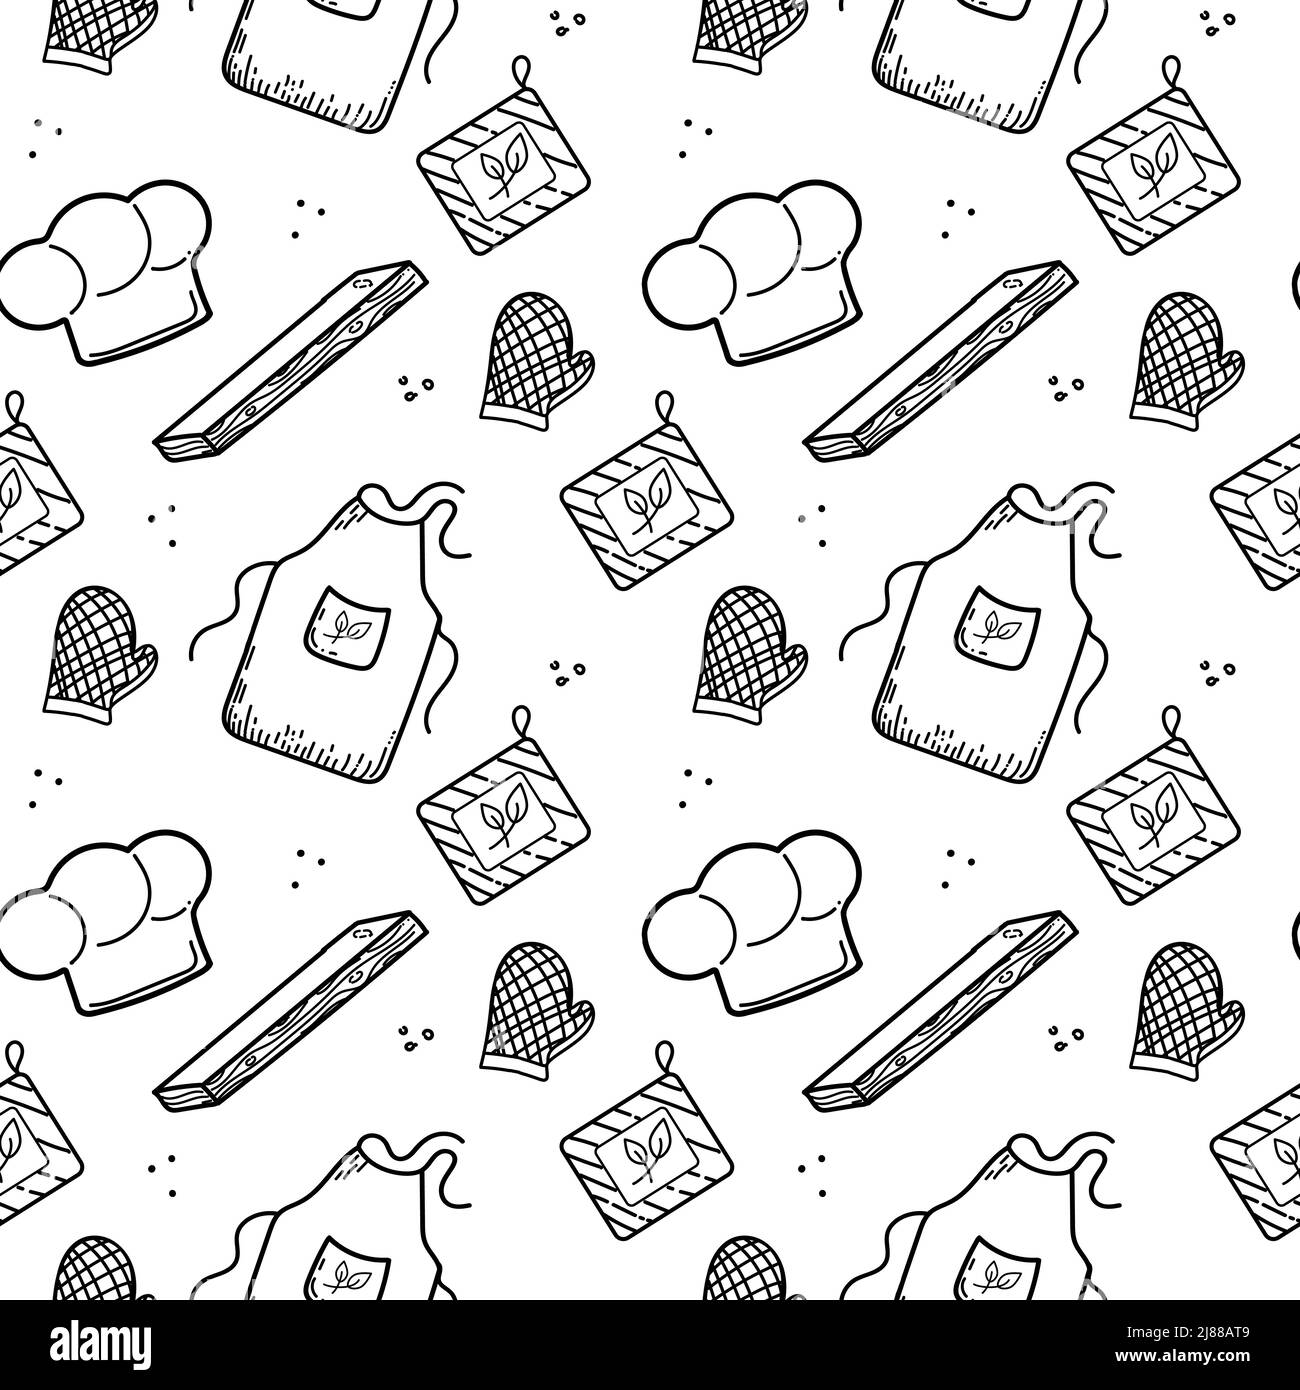 Hand Drawn Kitchen Whisk Whipping Tool For Baking Doodle Style Sketch  Vector Stock Illustration - Download Image Now - iStock